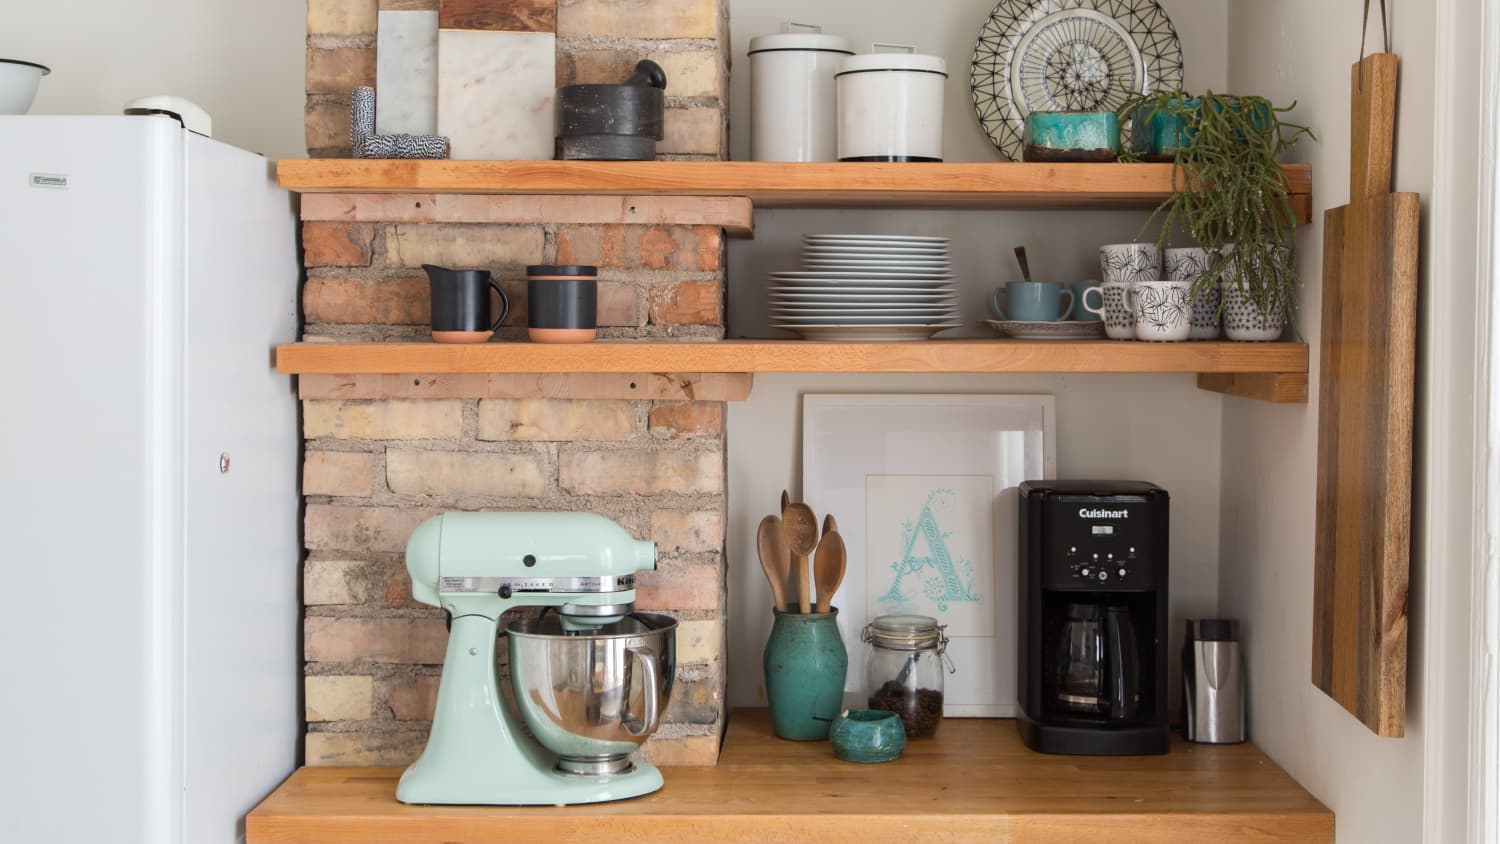 8 Clever Tips for Storing Small Appliances, According to Pro Organizers